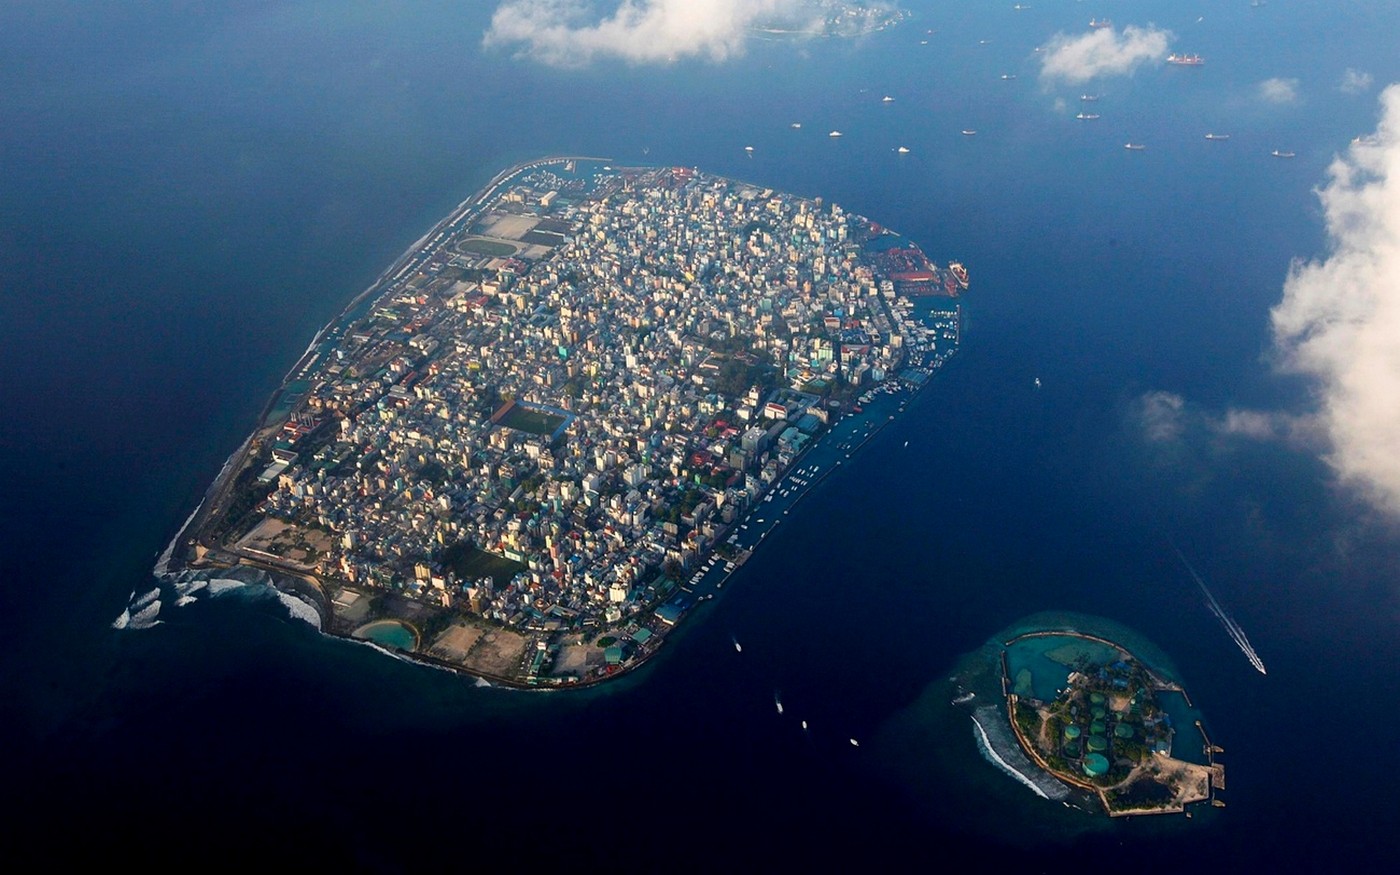 landscape, Photography, Nature, Island, Aerial view, Sea, Clouds, Maldives, City Wallpaper